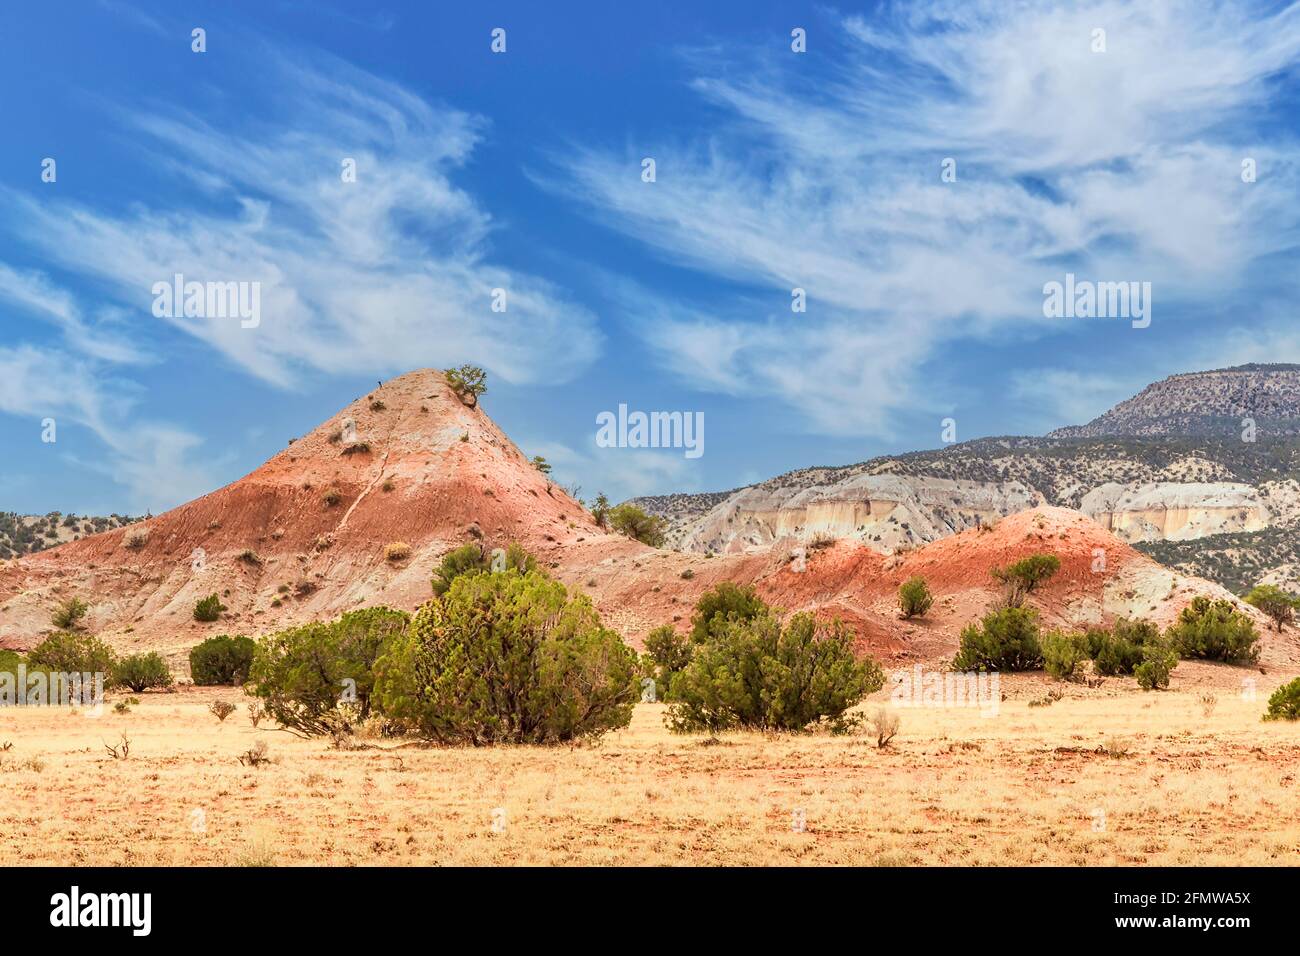 Sandstone rock formations at Abiquiu, New Mexico, USA Stock Photo